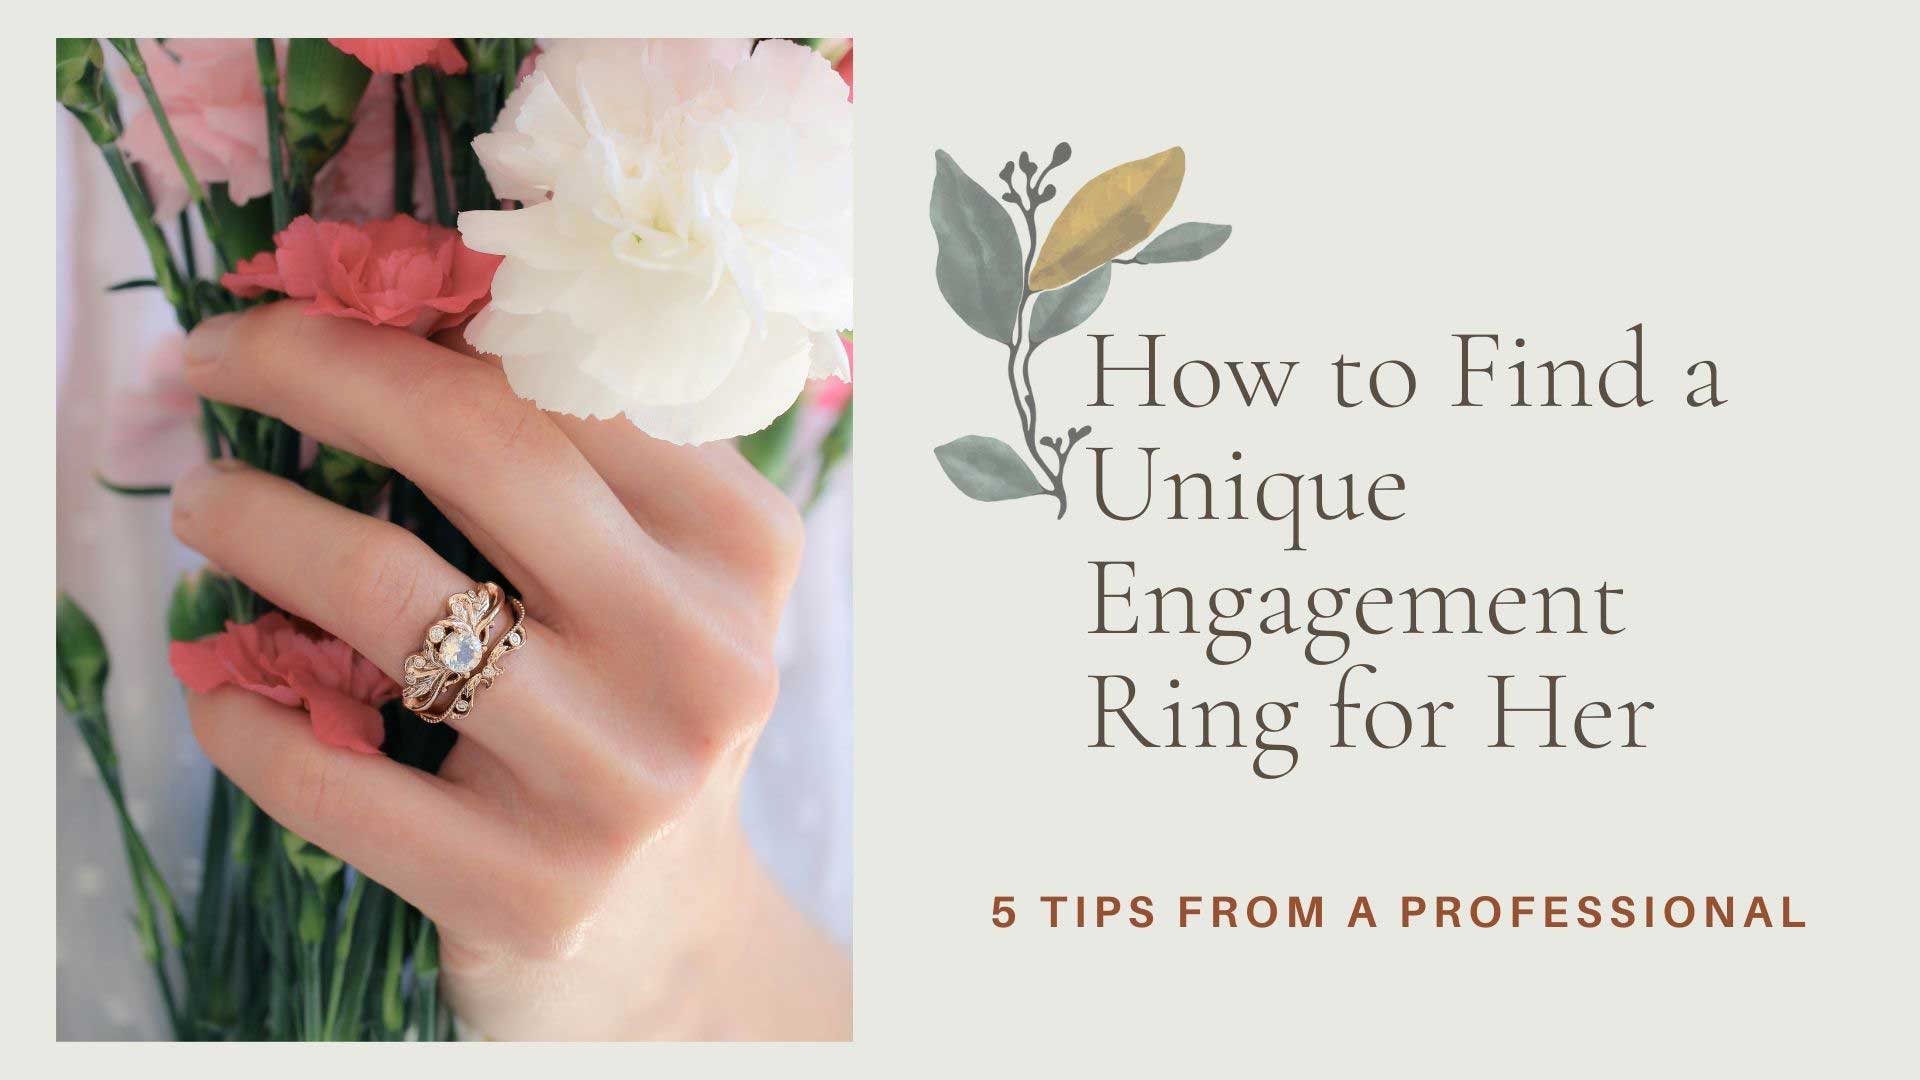 How to Find a Unique Engagment Ring for Her